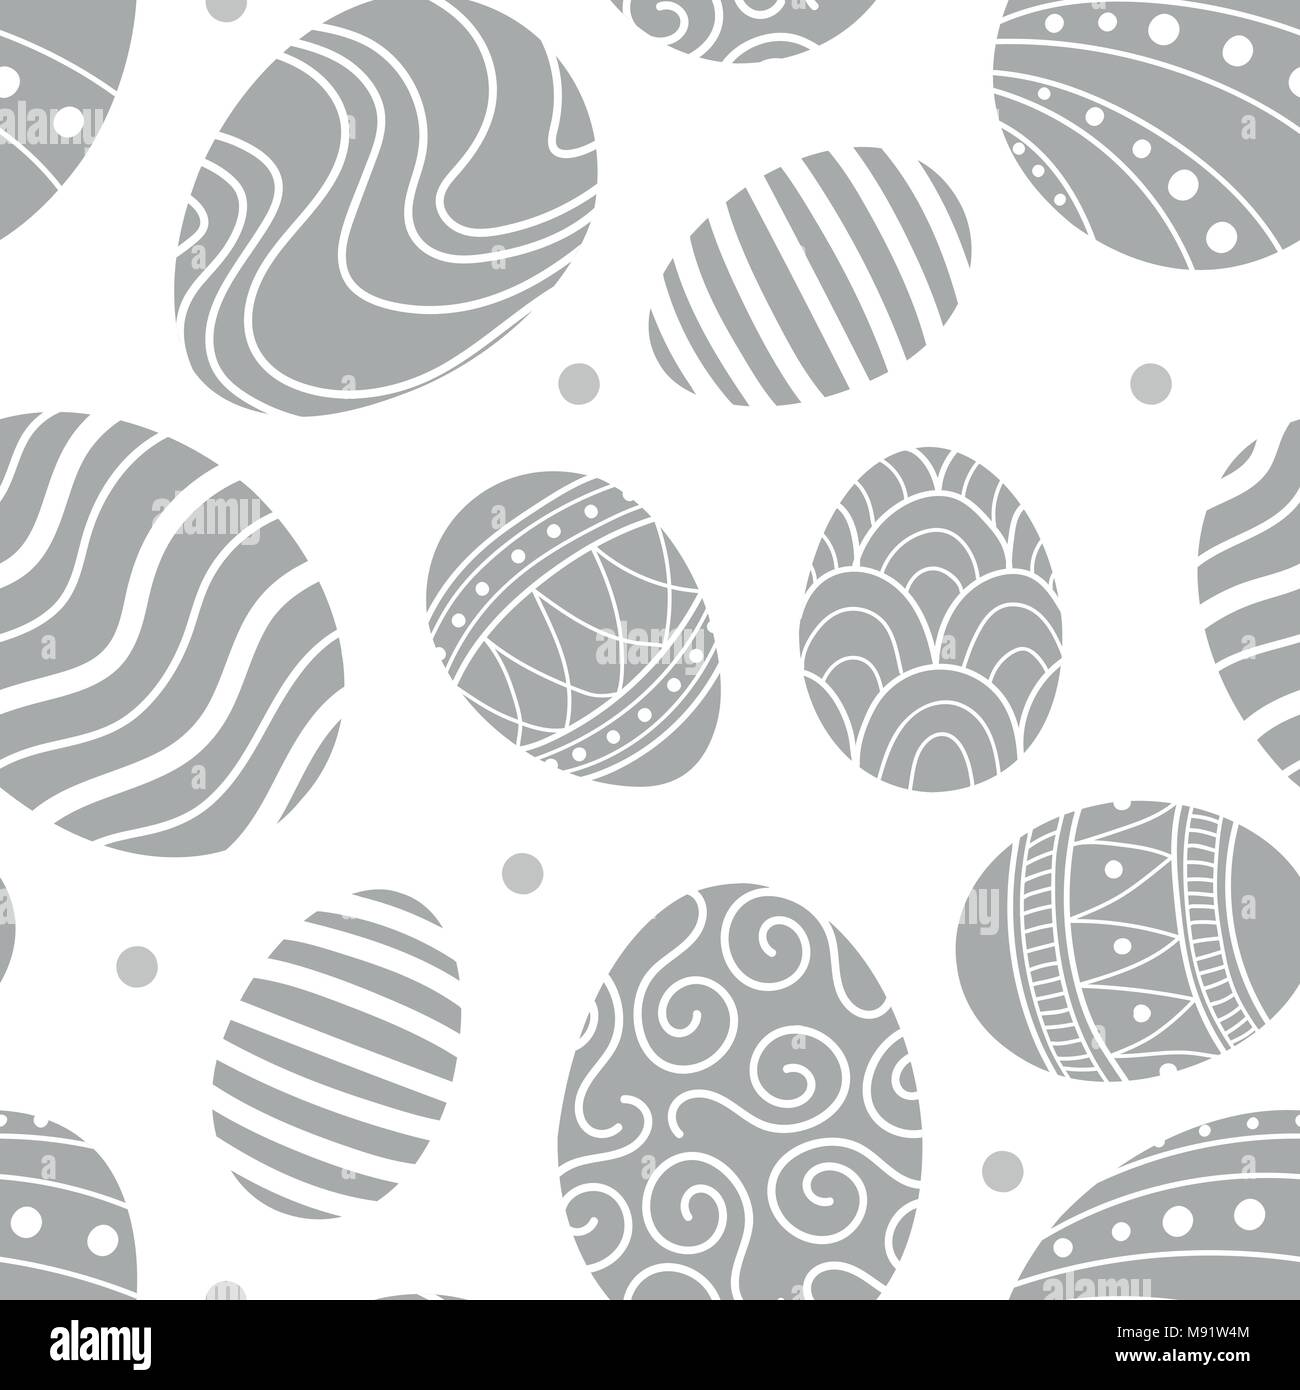 Easter eggs in light gray silhouette and dots random on white background. Cute hand drawn seamless pattern design for Easter festival in vector illust Stock Vector